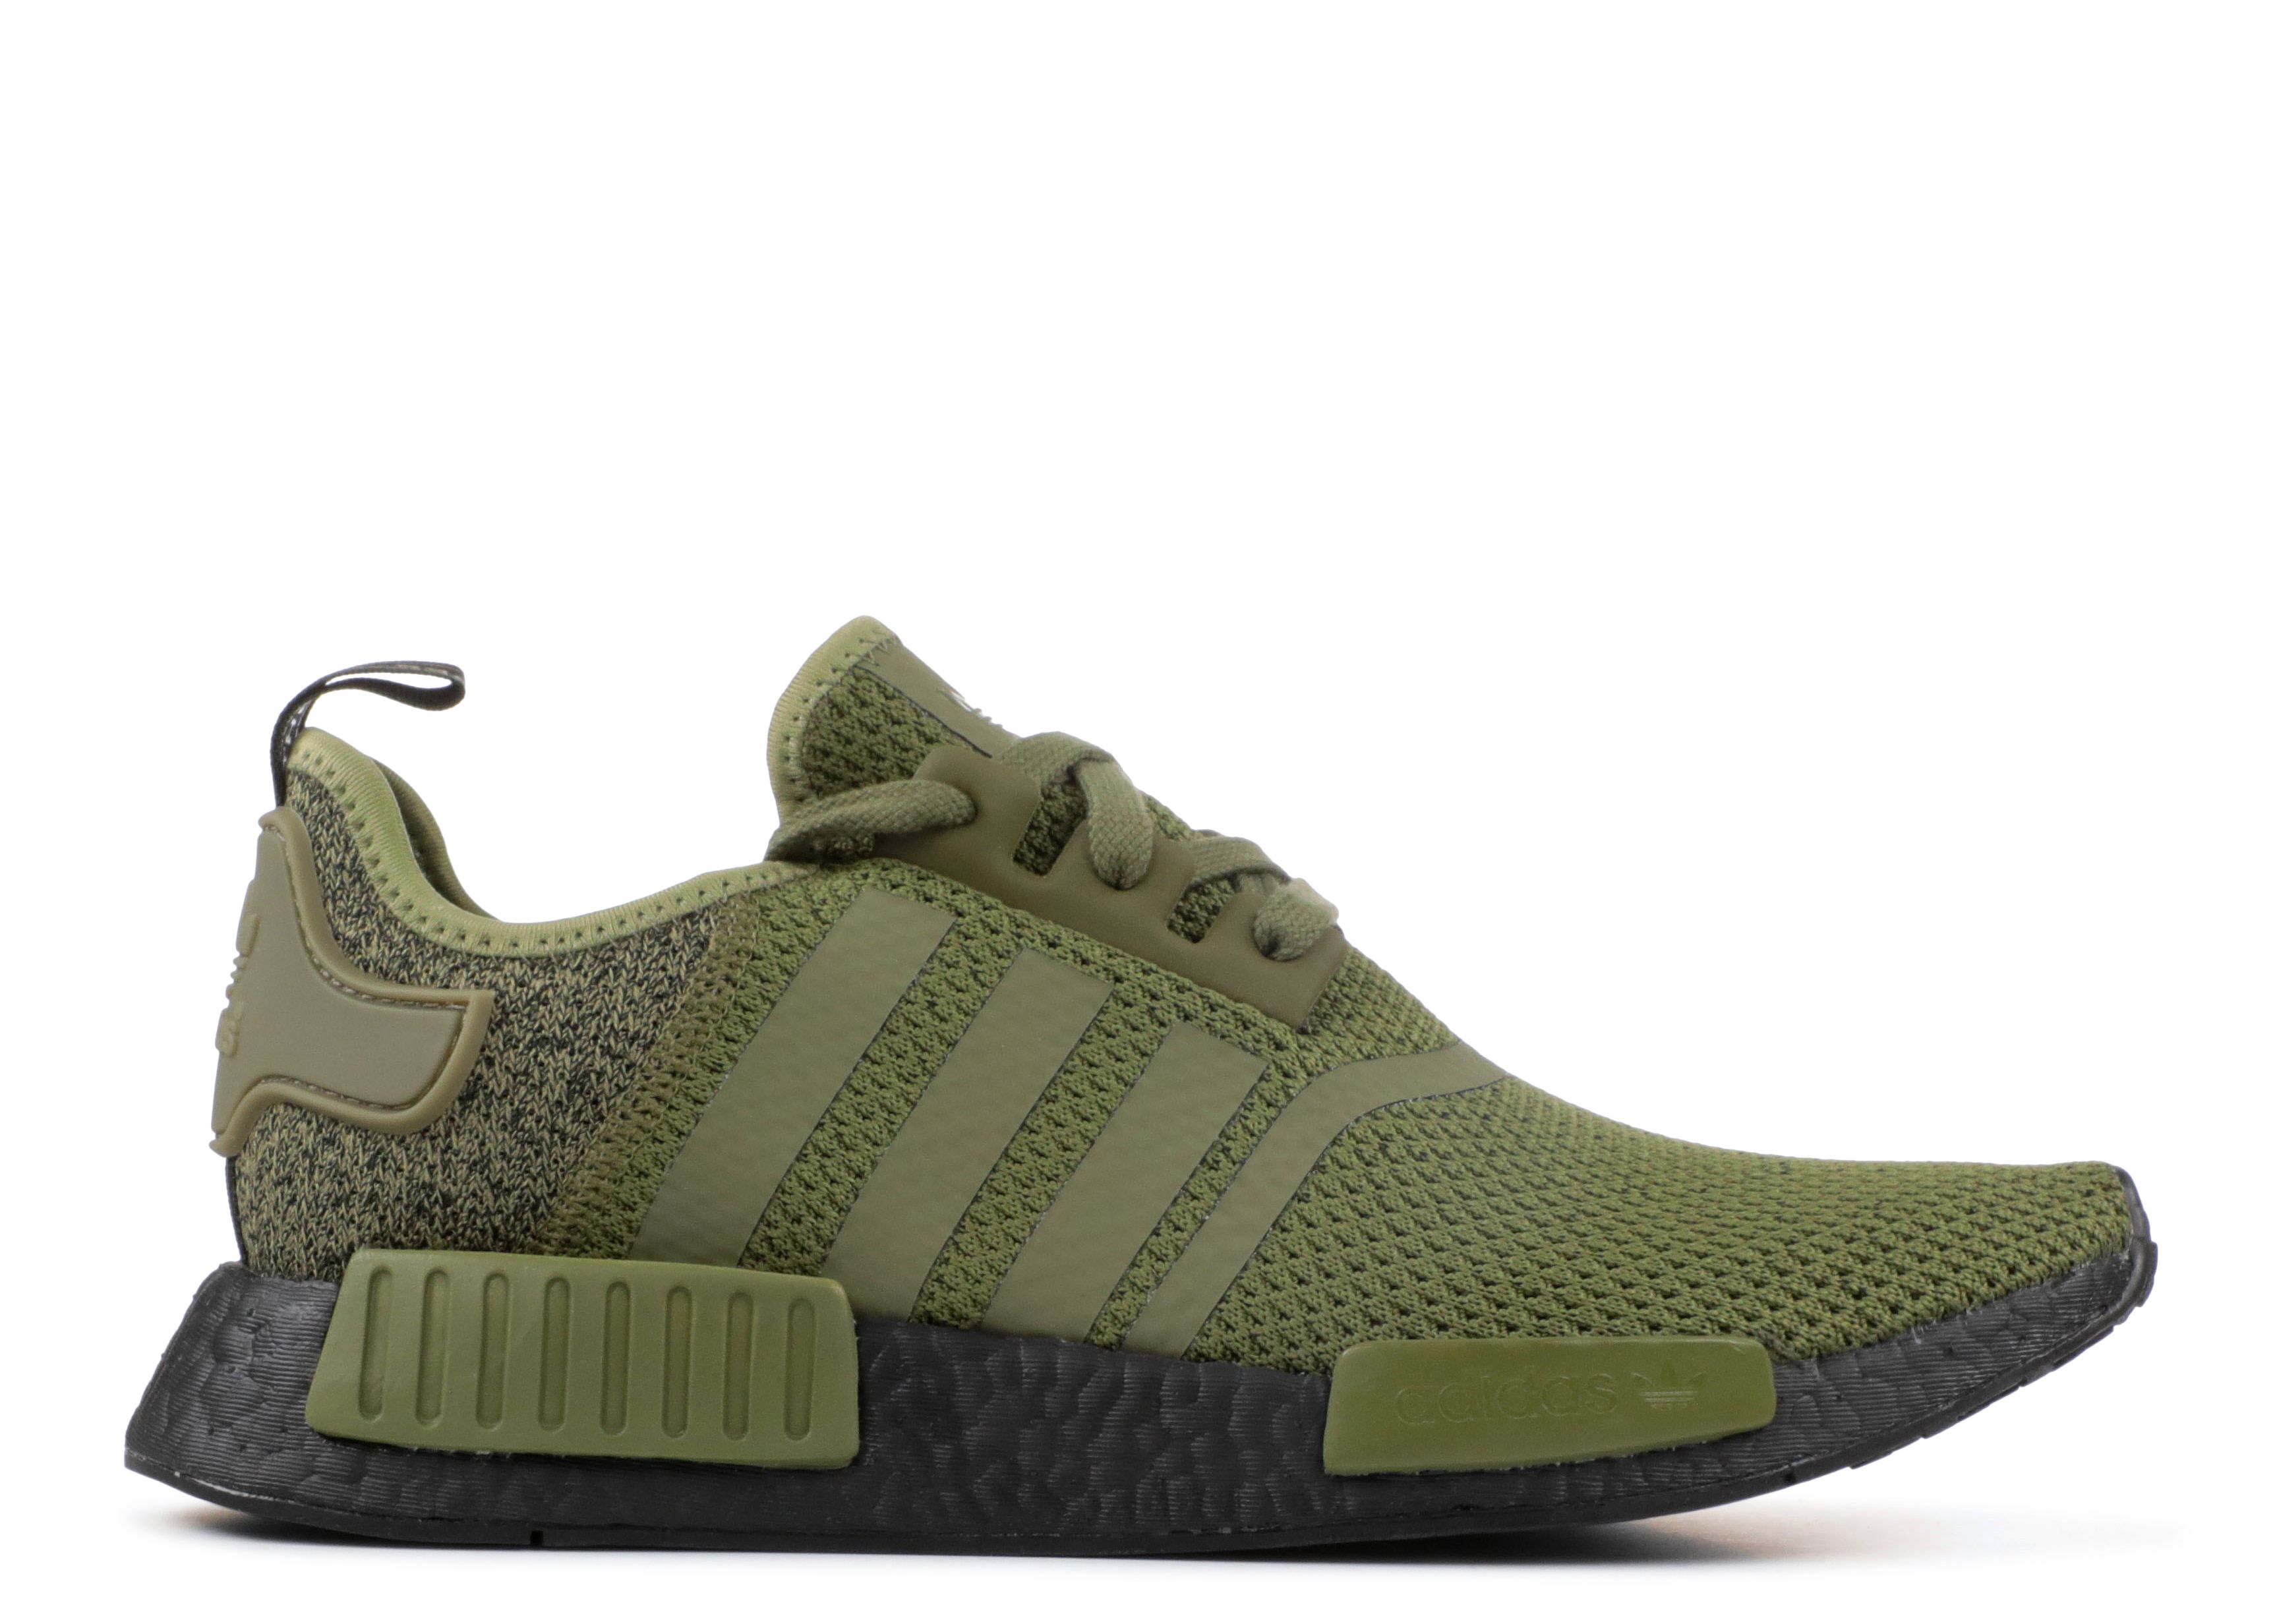 adidas nmd olive green and black